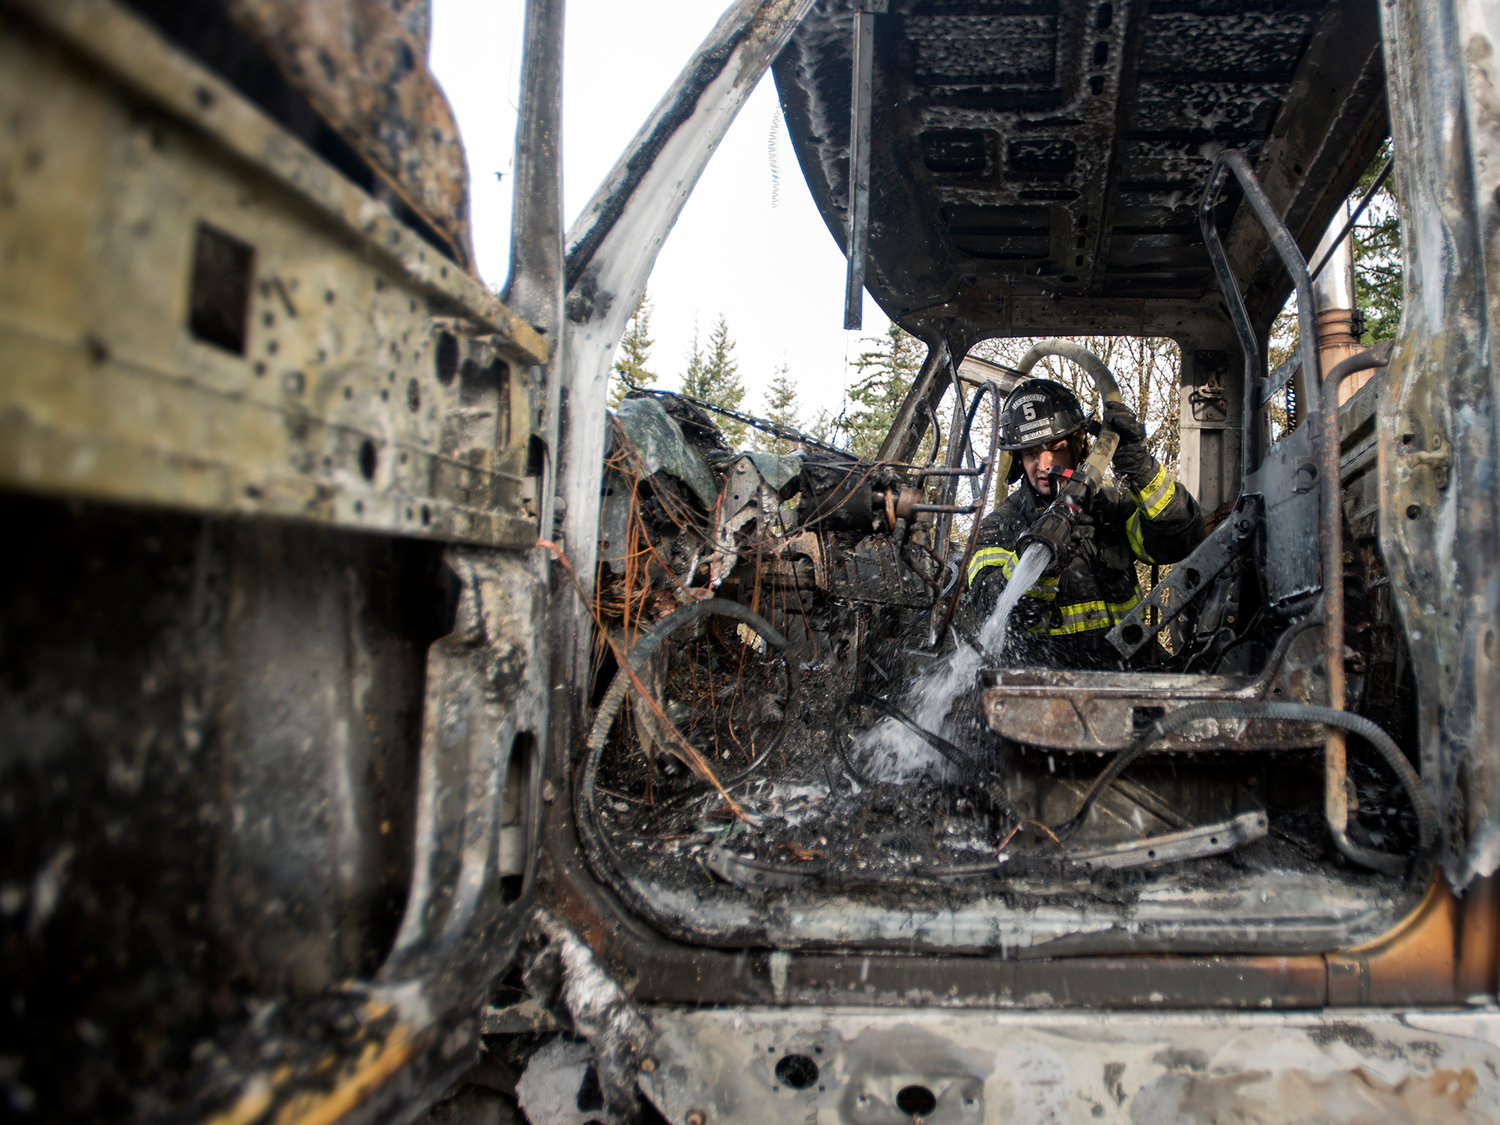 Lewis County District No. 5 firefighter, Brad Bozarth, puts out hot spots inside the cab of a semi truck that caught fire while driving north on Interstate 5 near exit 71 in Napavine on Tuesday afternoon. No injuries were reported in the incident.